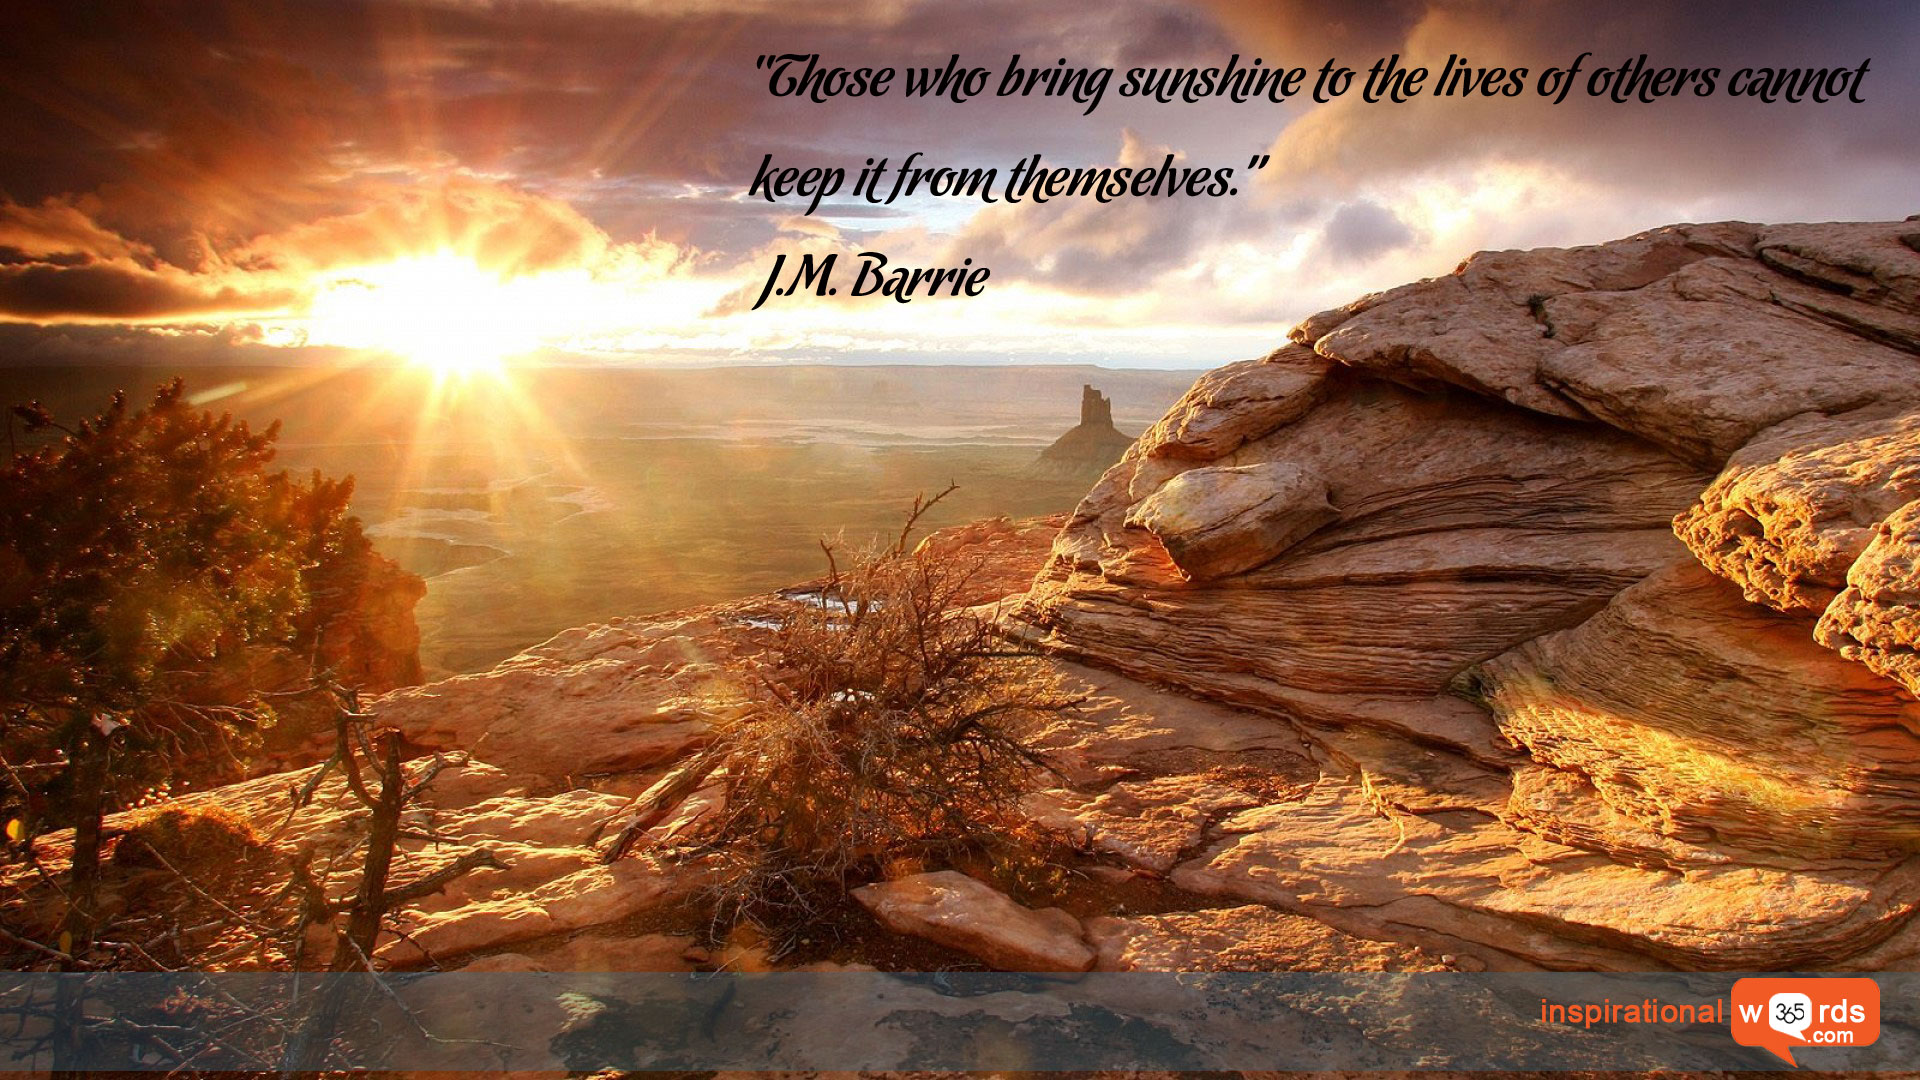 Inspirational Wallpaper Quote By J M Barrie Words